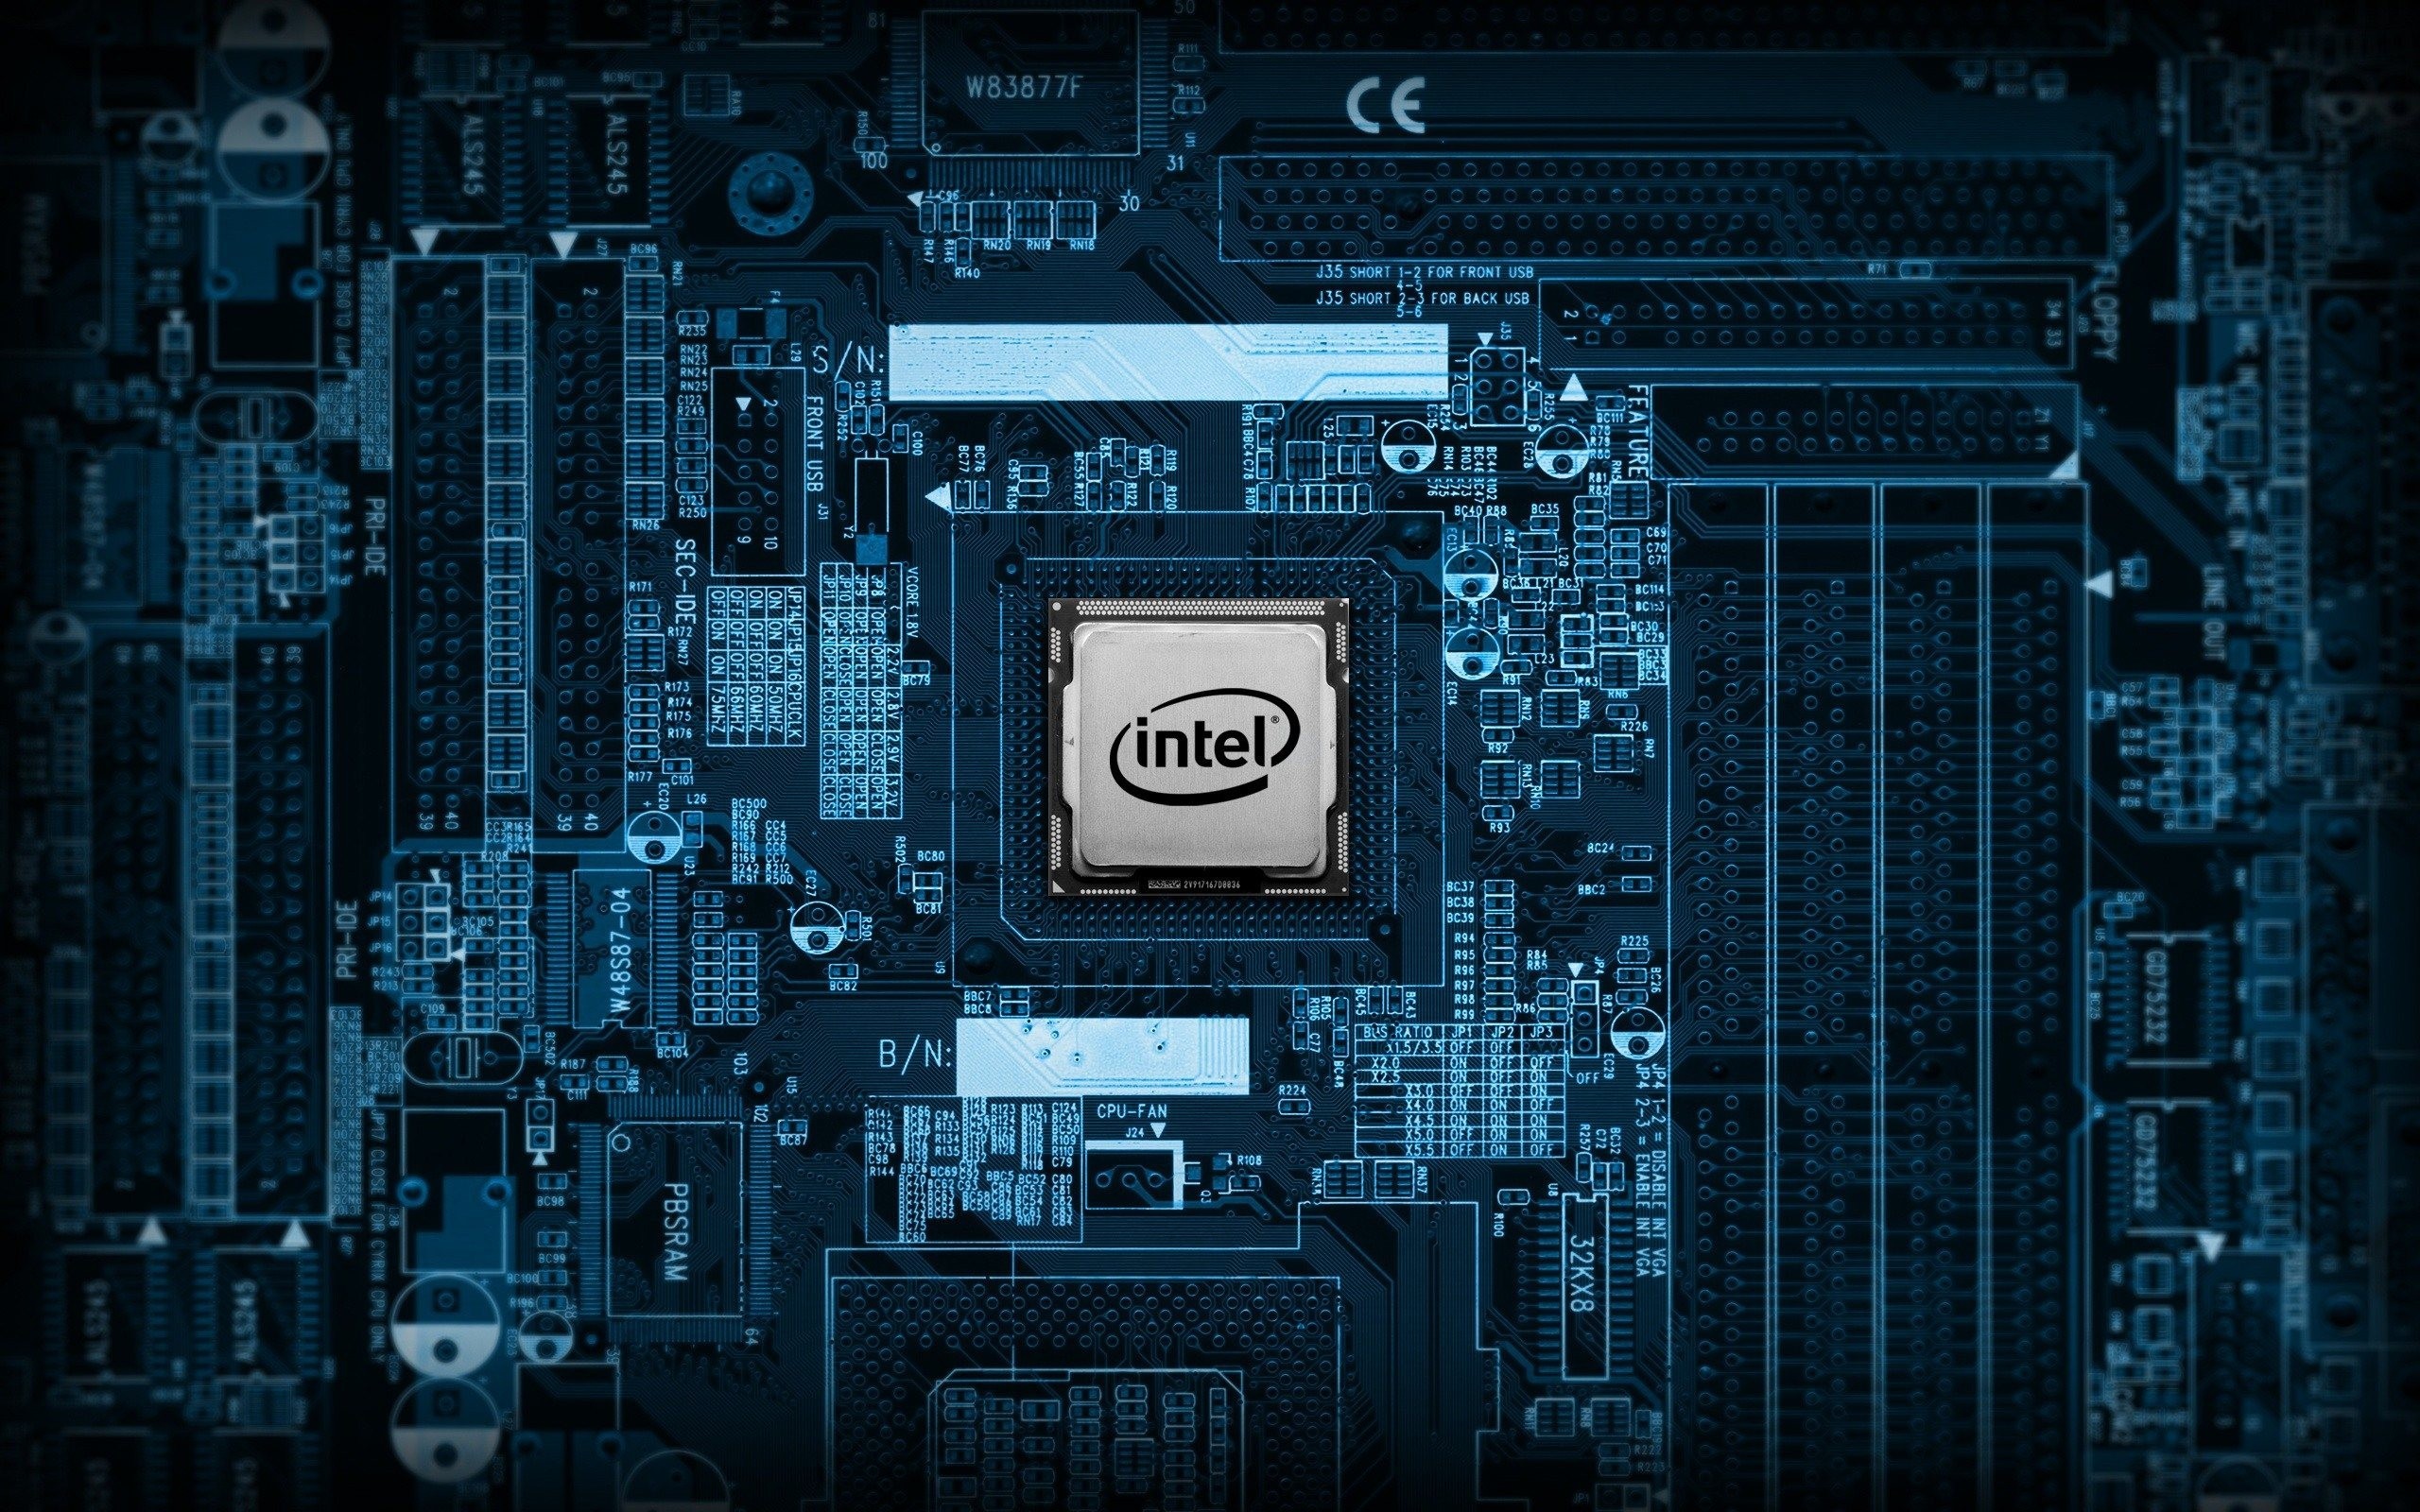 Intel chip on the motherboard wallpapers and images - wallpapers